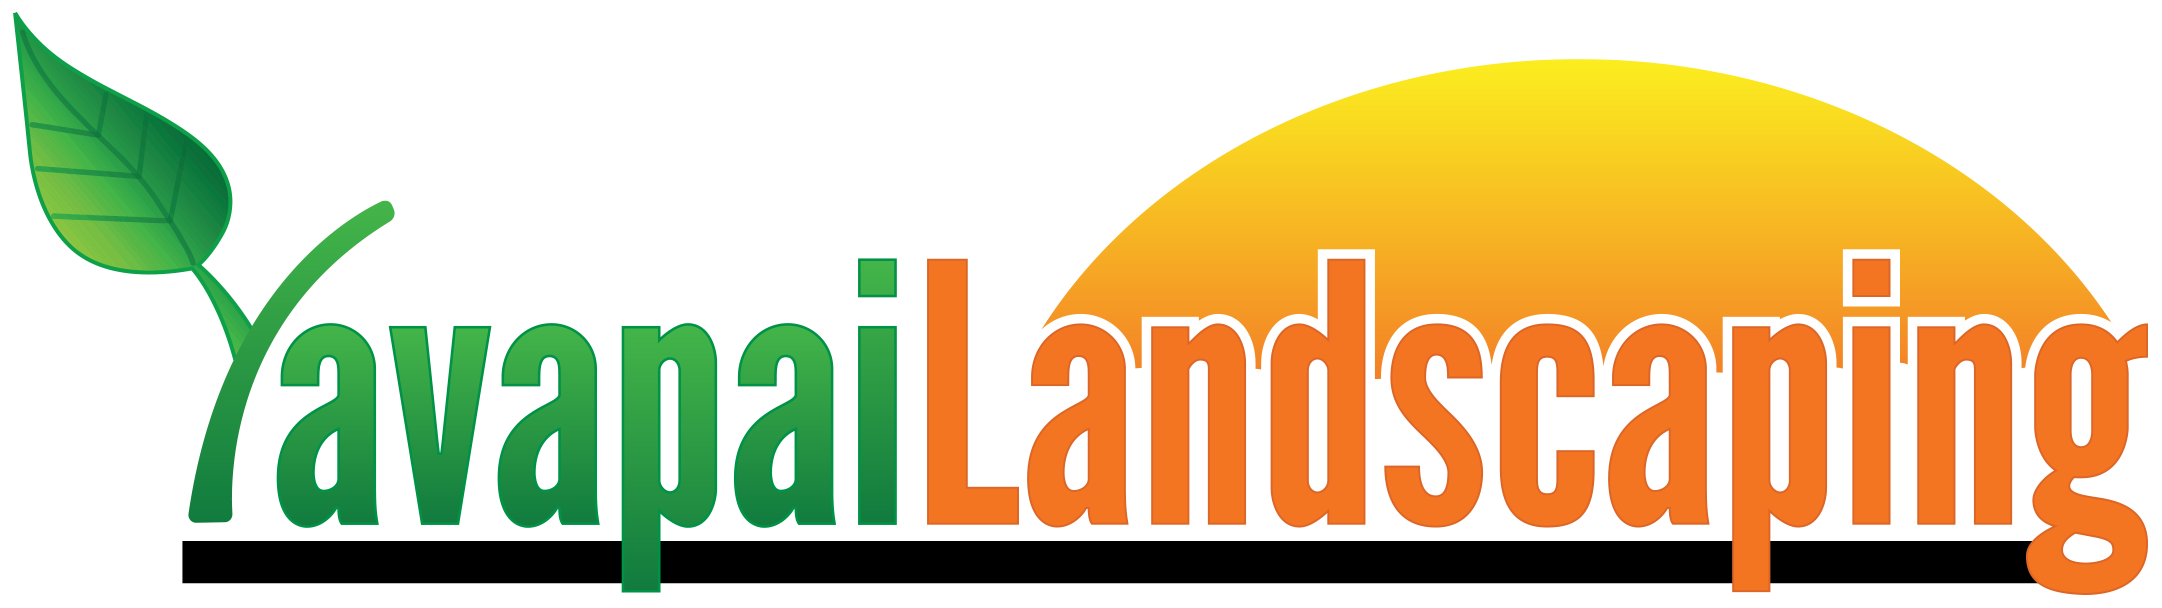 Logo for yavapai landscaping featuring a stylized orange sun setting behind green text, with a singular green leaf attached to the first letter of the default kit.